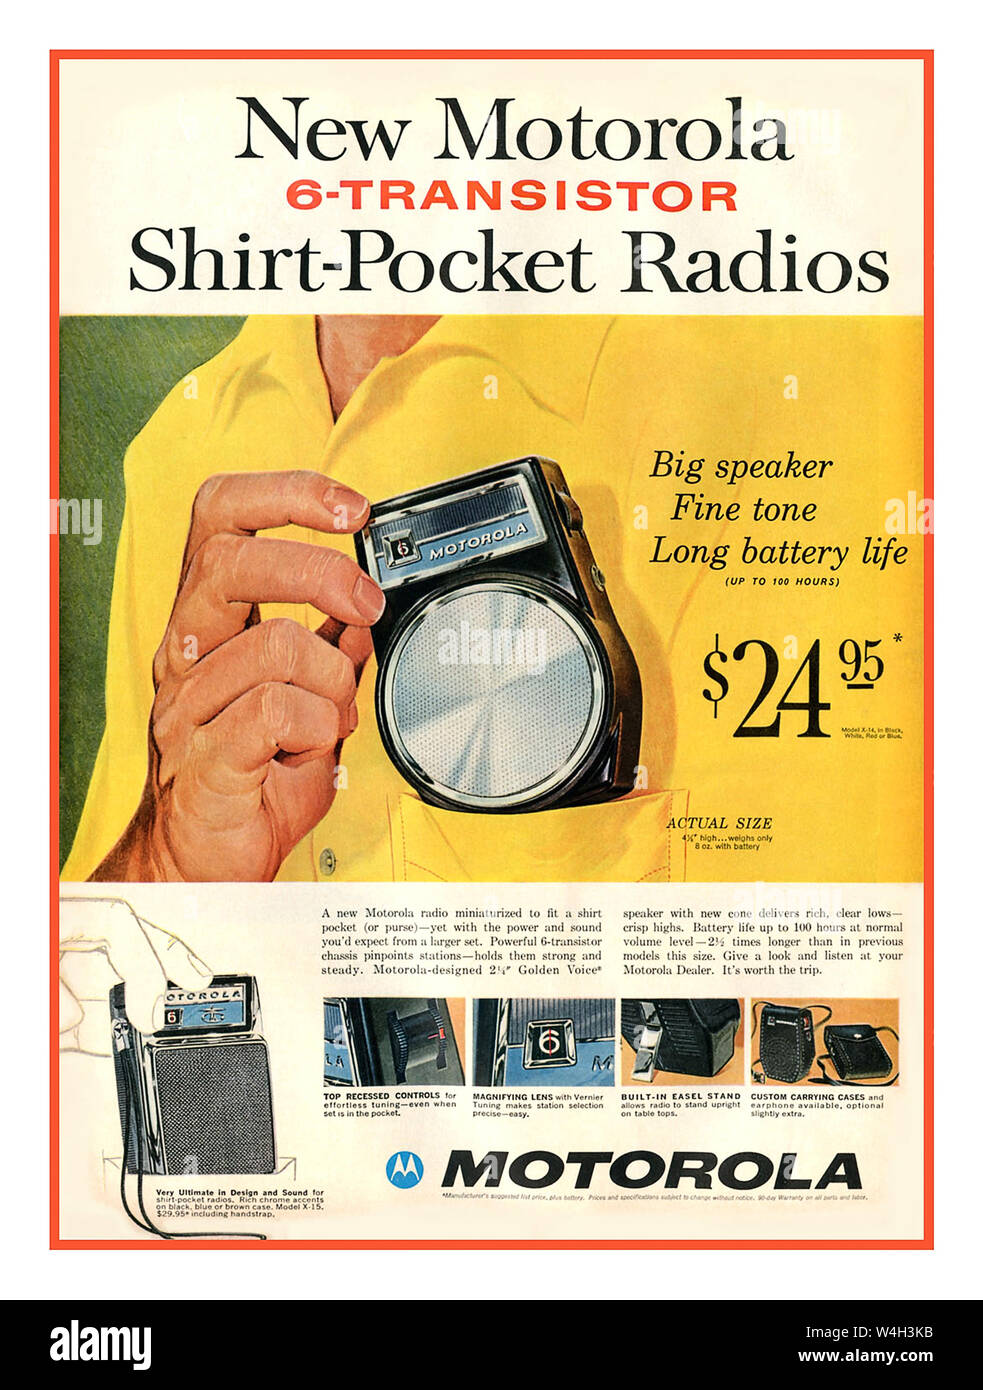 Vintage 1960's Motorola Advertisement for early transistor pocket radio. The first Motorola brand automobile radio was produced in 1930. Motorola began the commercial production of transistors at a new $1.5 million facility in Phoenix in 1955. This advertisement is from May 23, 1960 Stock Photo